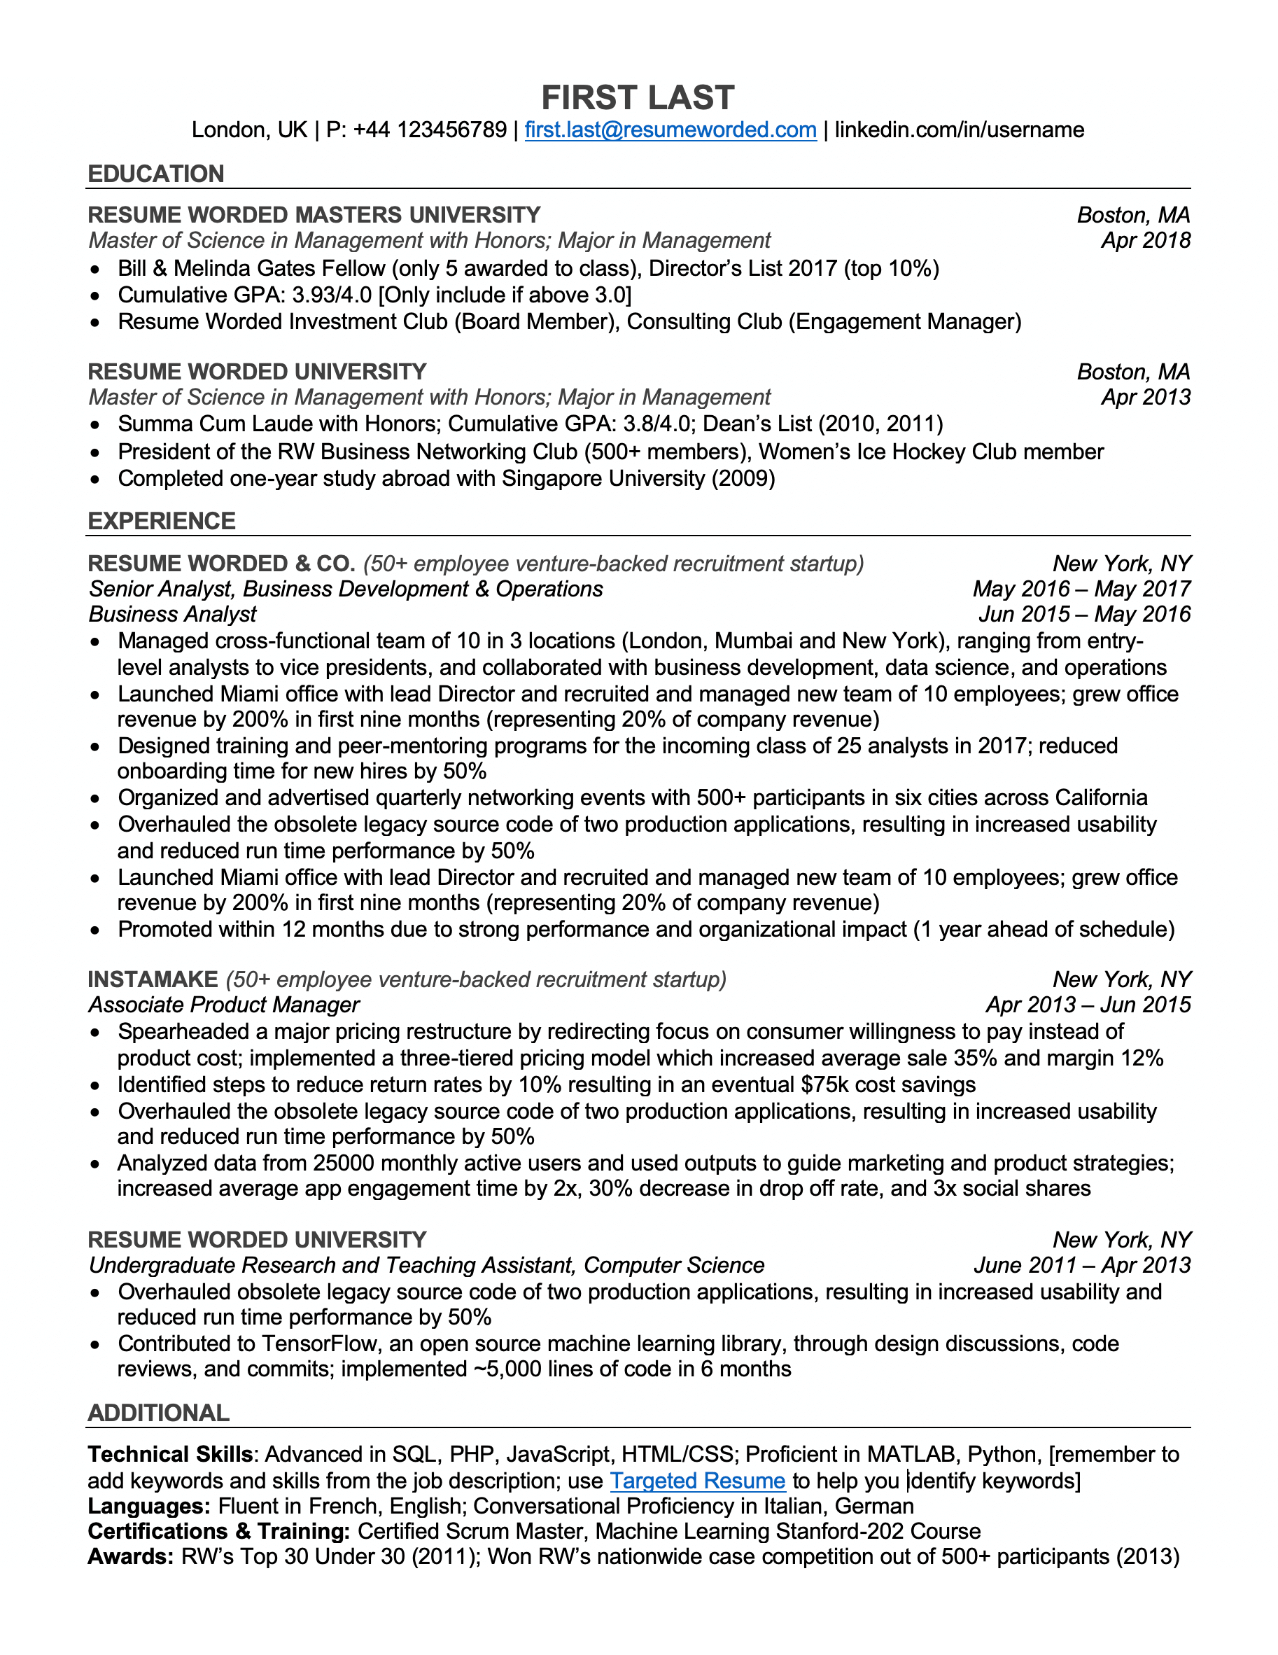 Professional ATS Resume Templates for Experienced Hires and College Students or Grads ...1275 x 1650